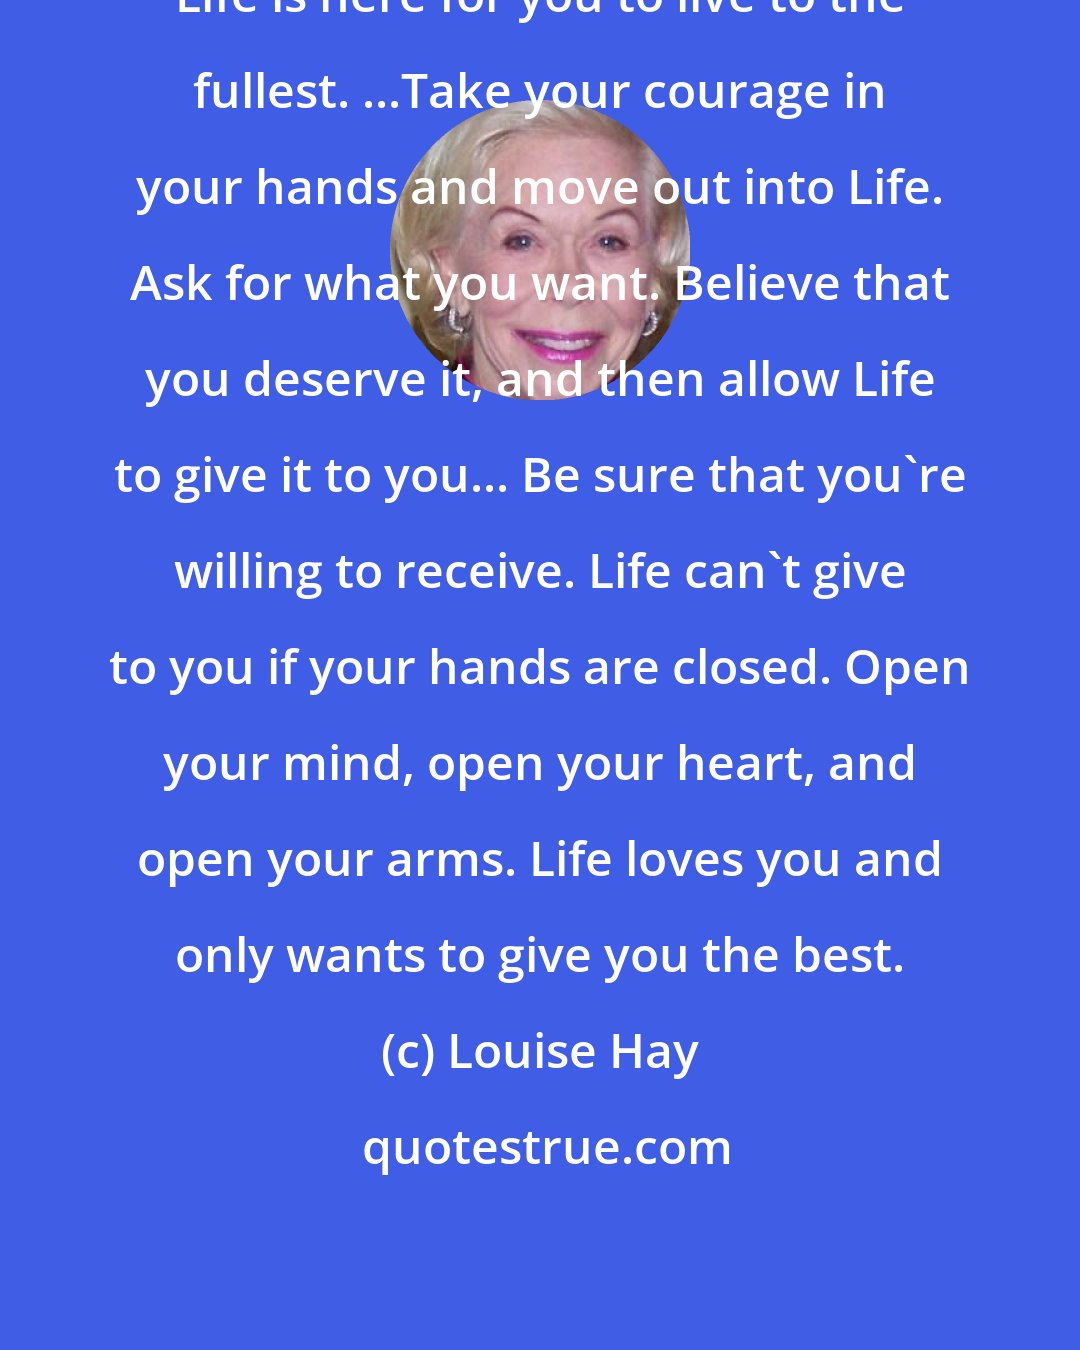 Louise Hay: Life is here for you to live to the fullest. ...Take your courage in your hands and move out into Life. Ask for what you want. Believe that you deserve it, and then allow Life to give it to you... Be sure that you're willing to receive. Life can't give to you if your hands are closed. Open your mind, open your heart, and open your arms. Life loves you and only wants to give you the best.